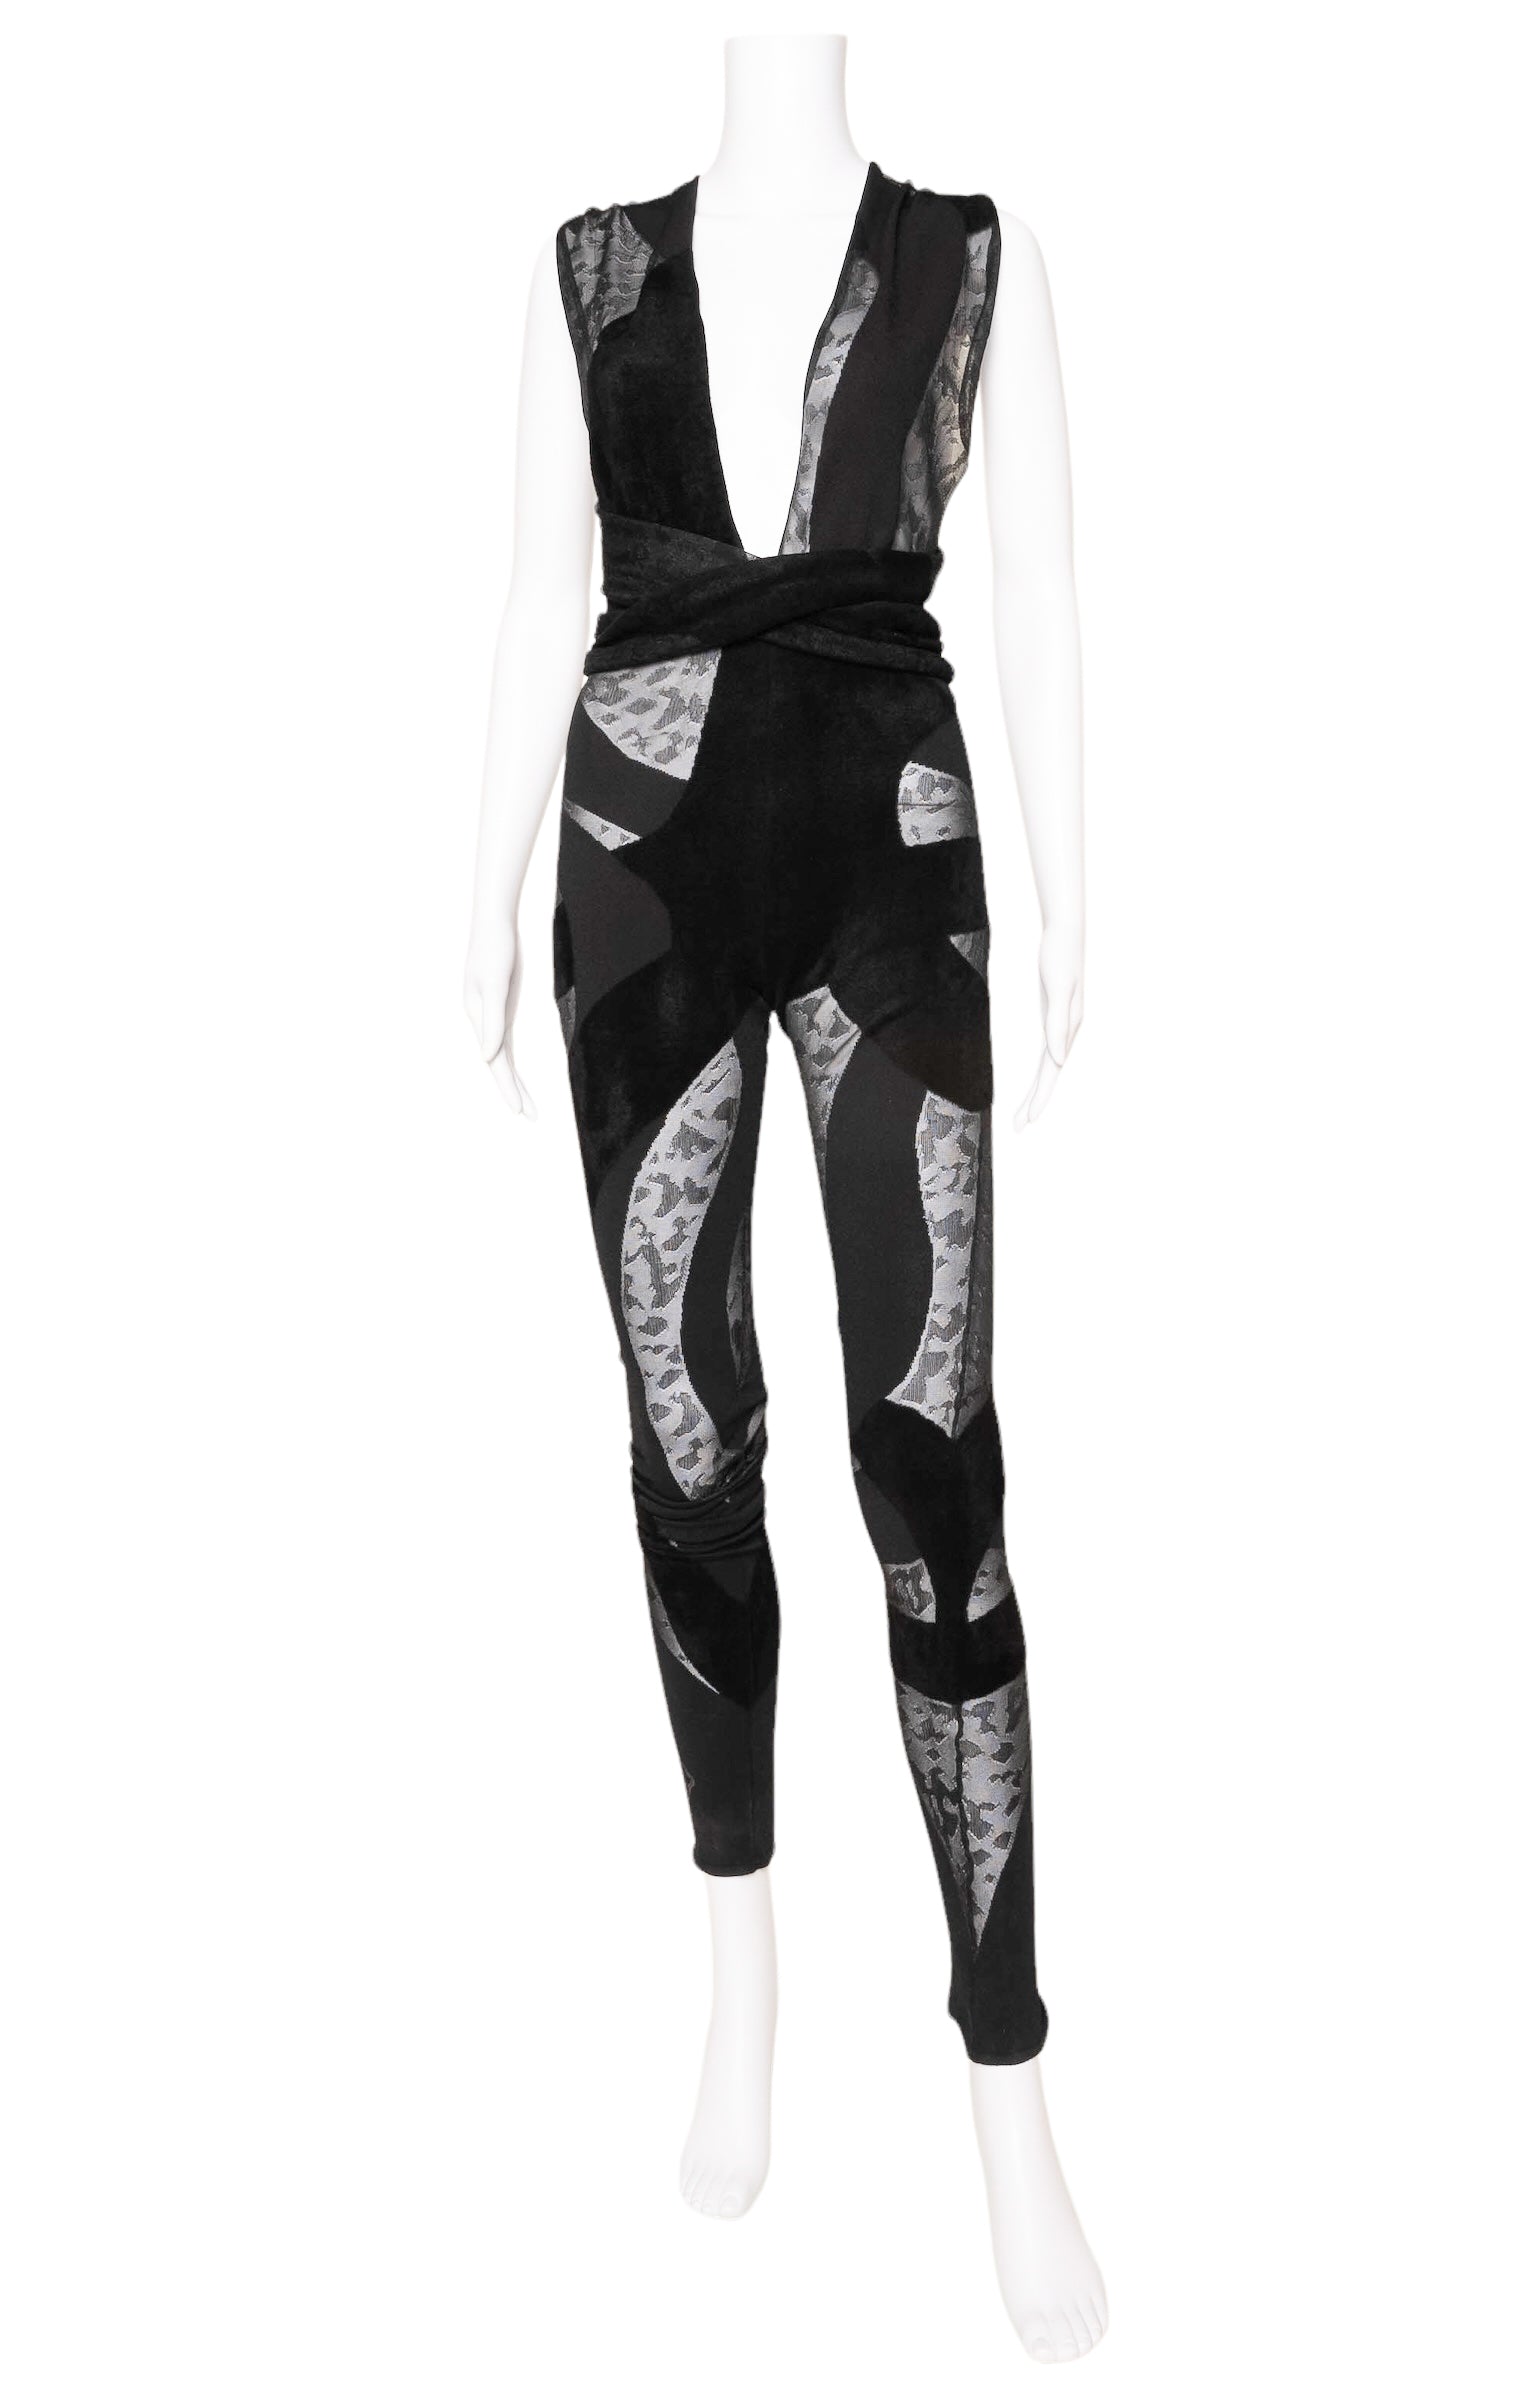 ROBERTO CAVALLI (RARE) Jumpsuit Size: IT 42 / Comparable to US 4-6